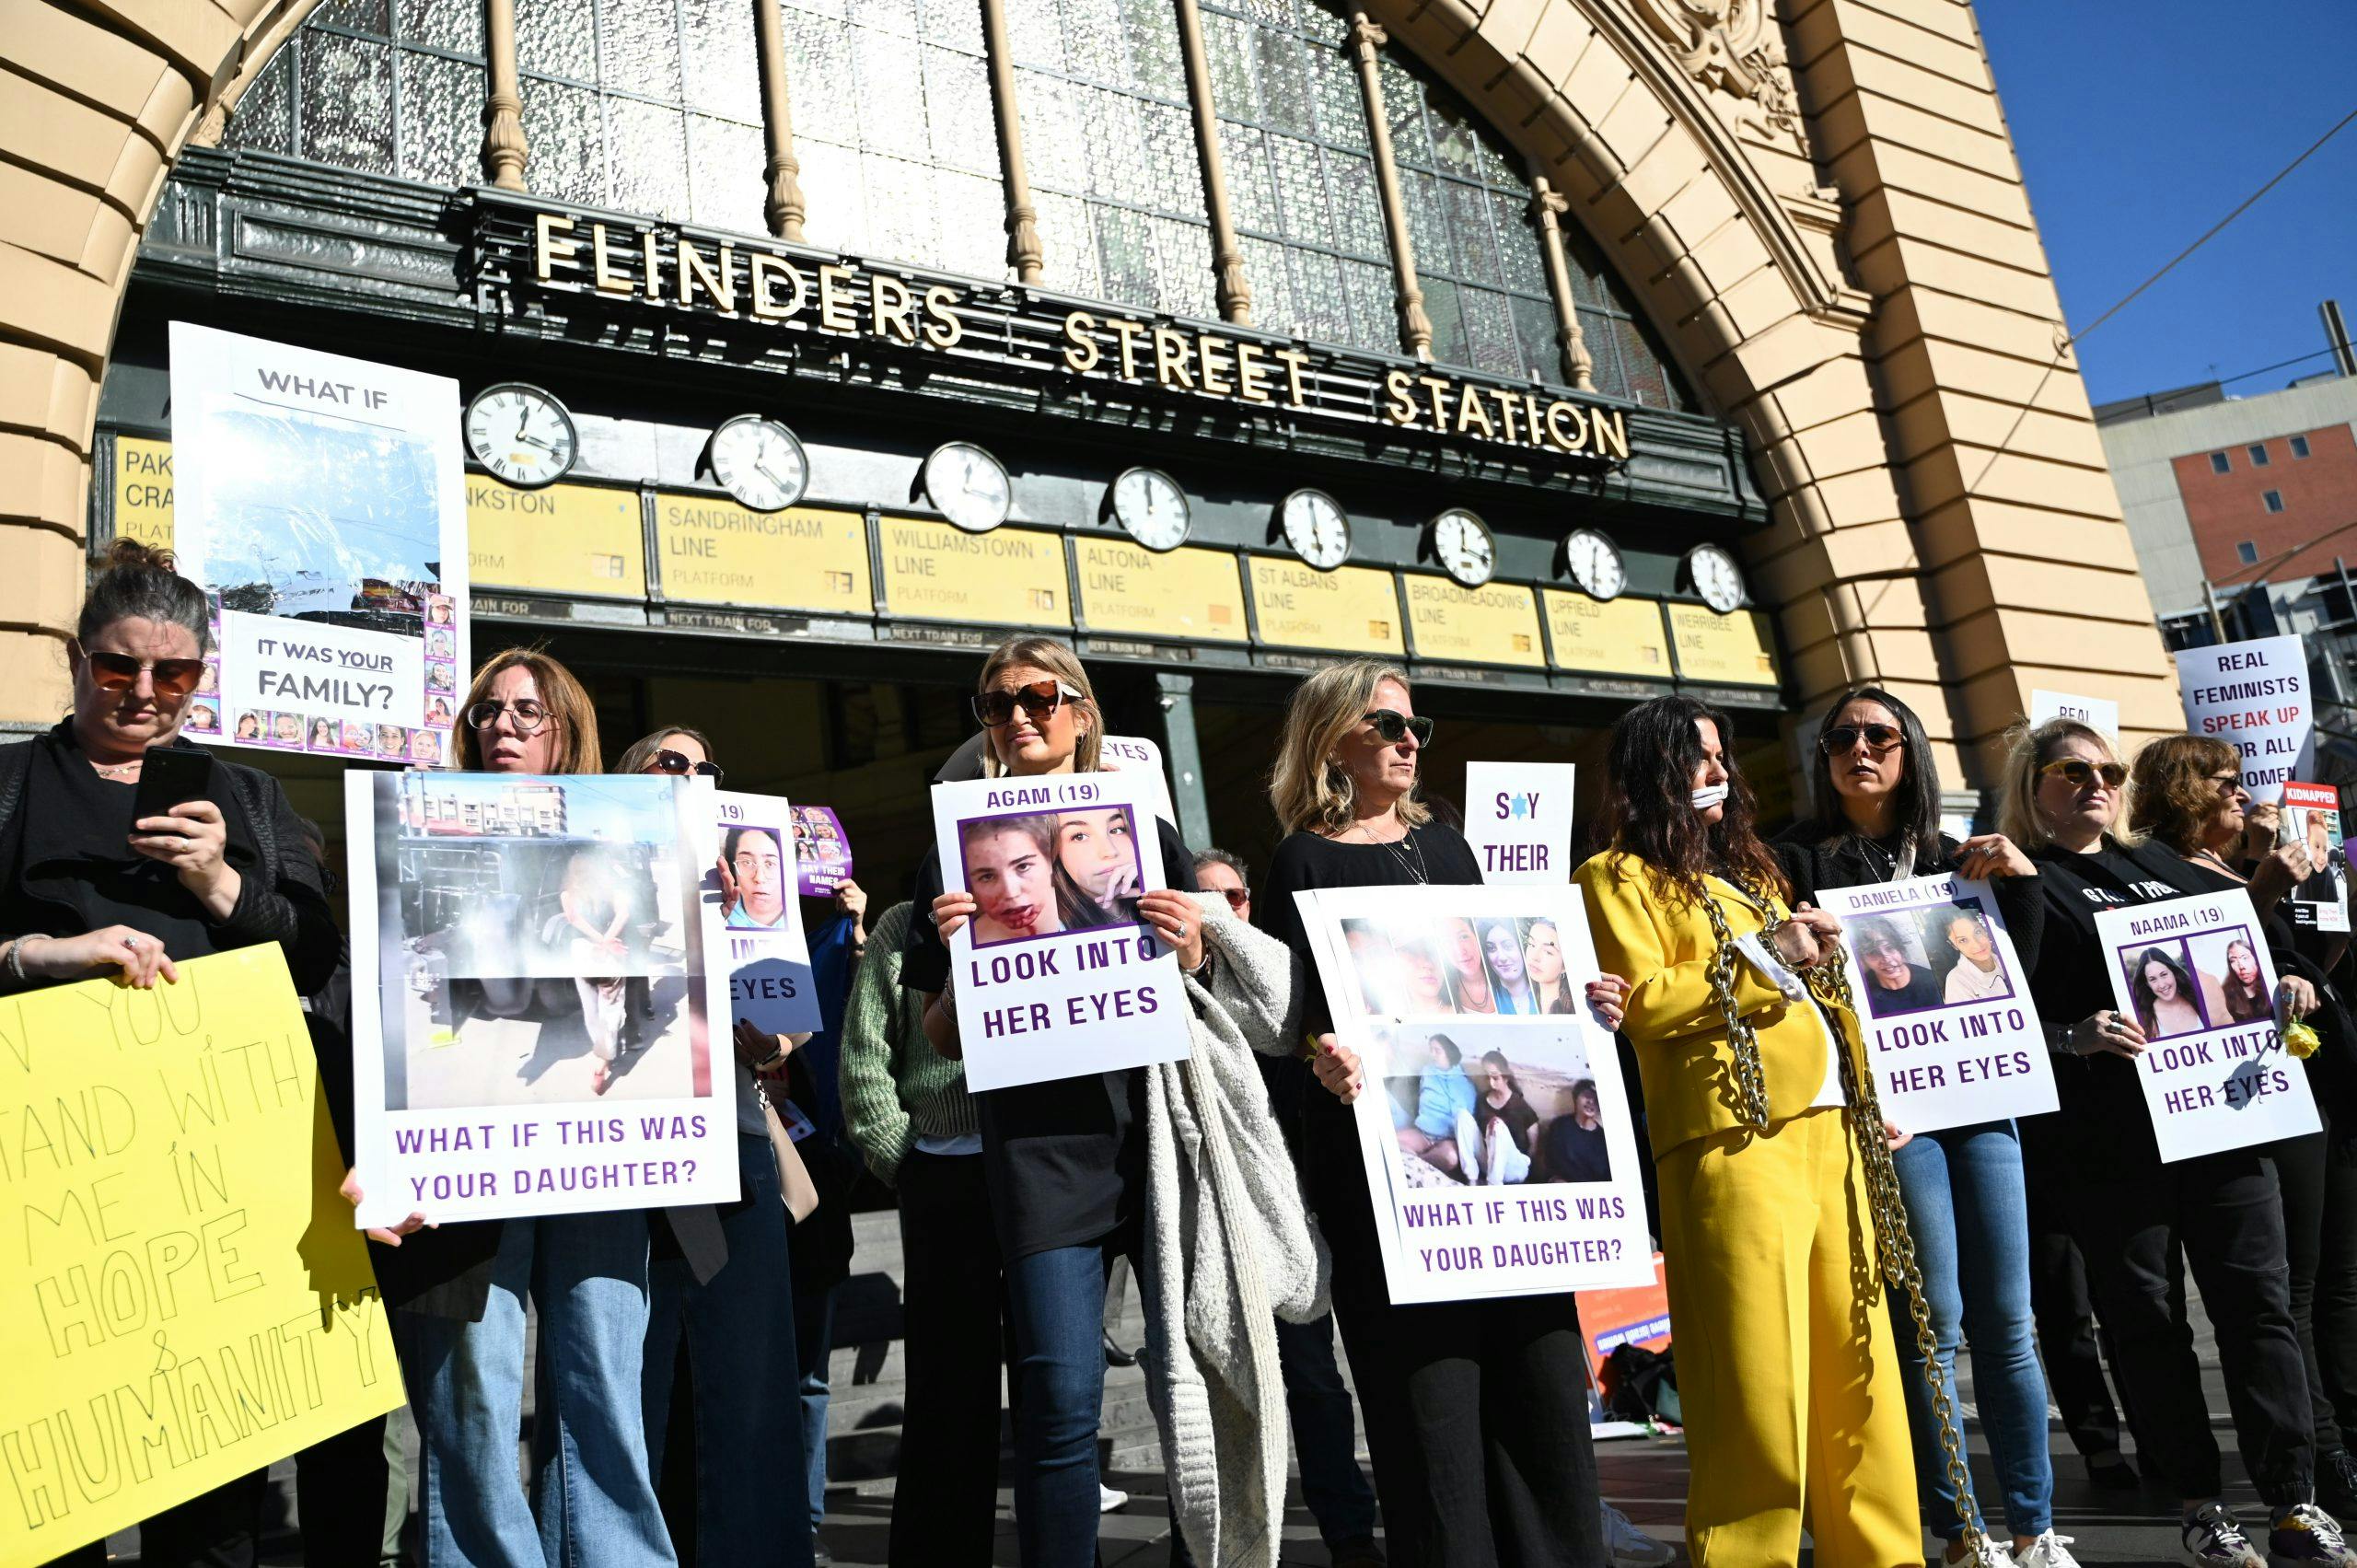 Women protesting on flinders street station steps about sexual crimes committed in Israel on October 7.